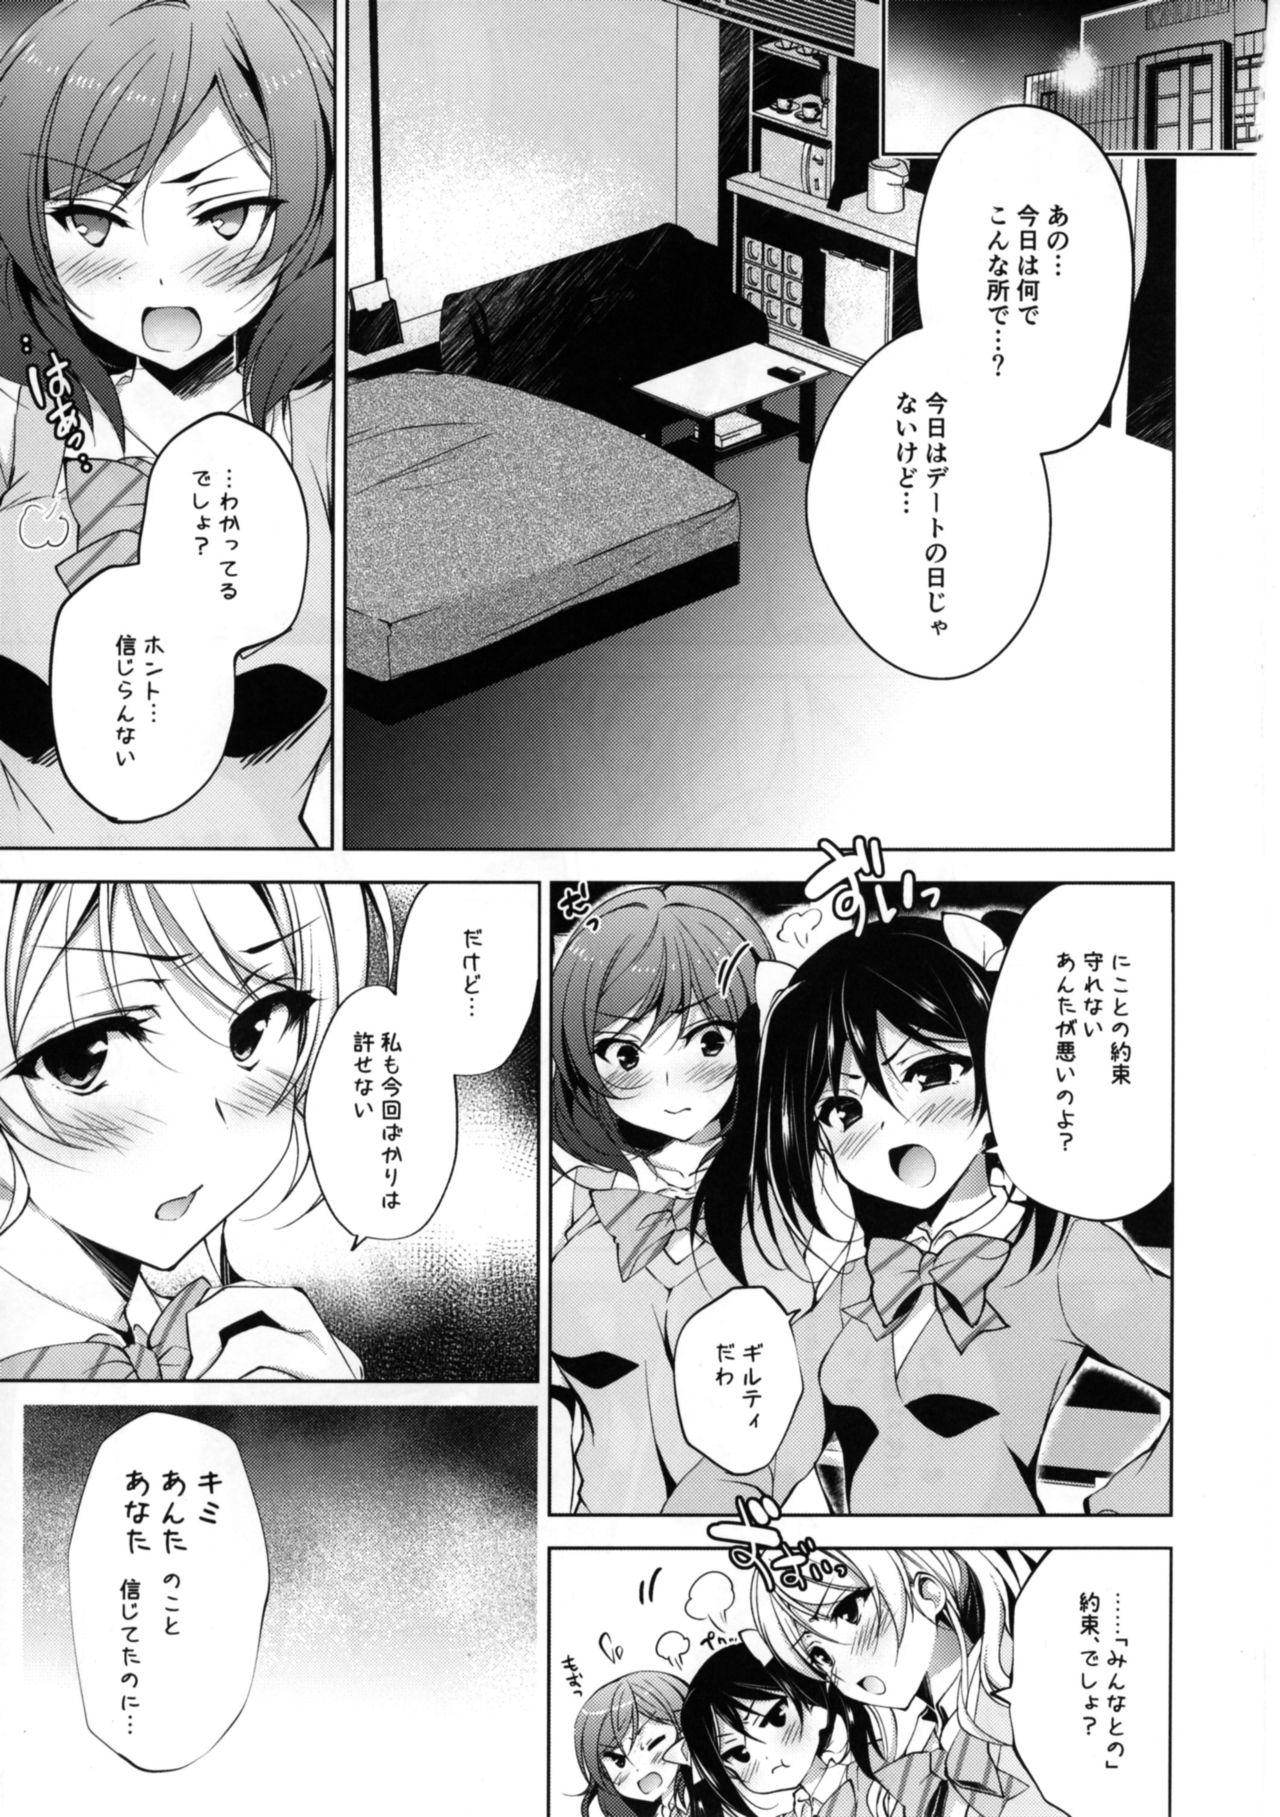 Transsexual BiBi Complex - Love live Party - Page 3